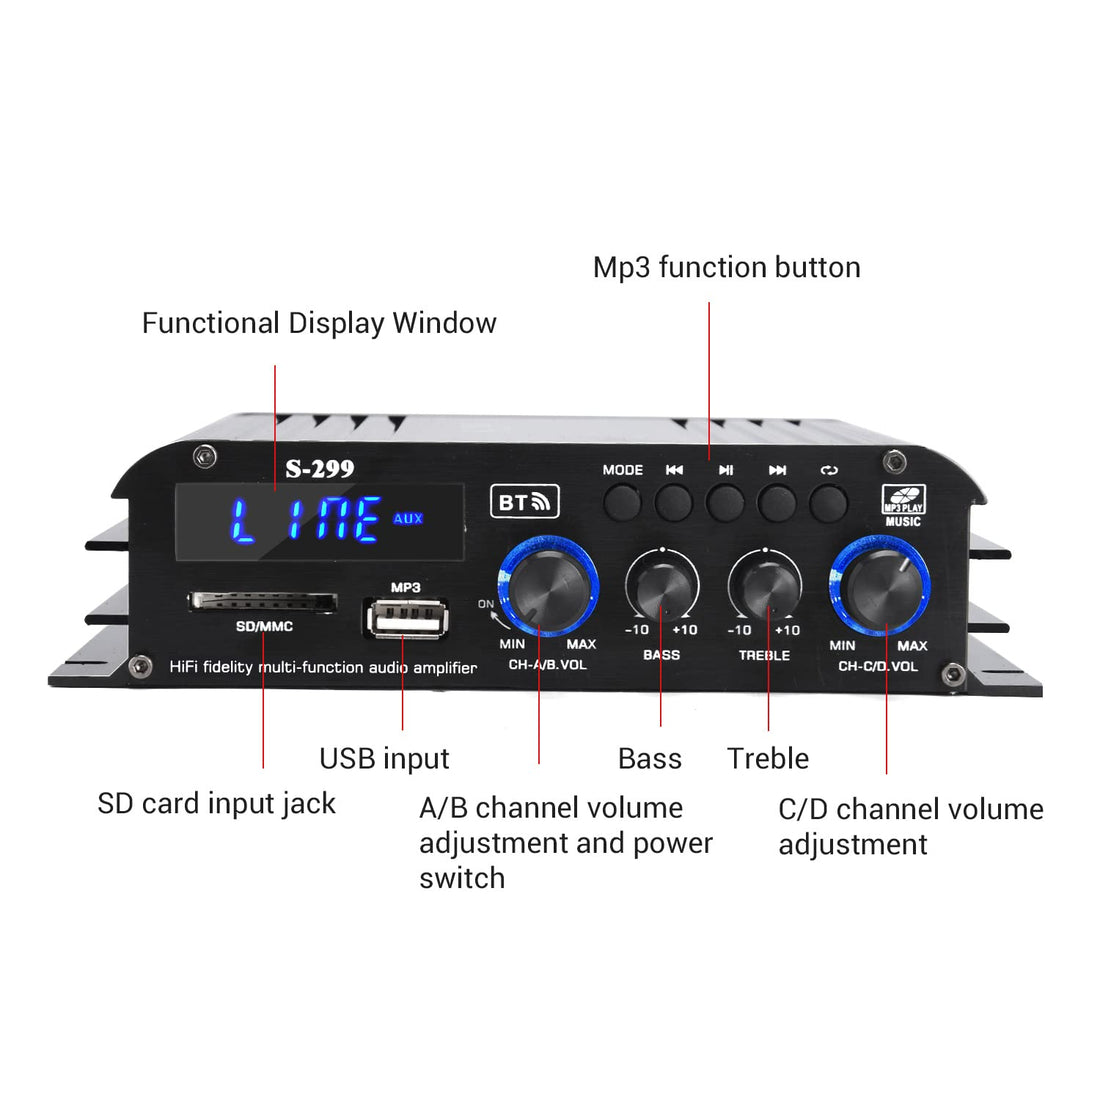 Suacopzar Max 800W Bluetooth Home Audio Amplifier, RMS 40Wx4 4.1CH Bluetooth Power Amplifier with Active Subwoofer, Sound Audio System w/AUX, Headphone Jack, USB Port, SD, TF Card port, Remote Control